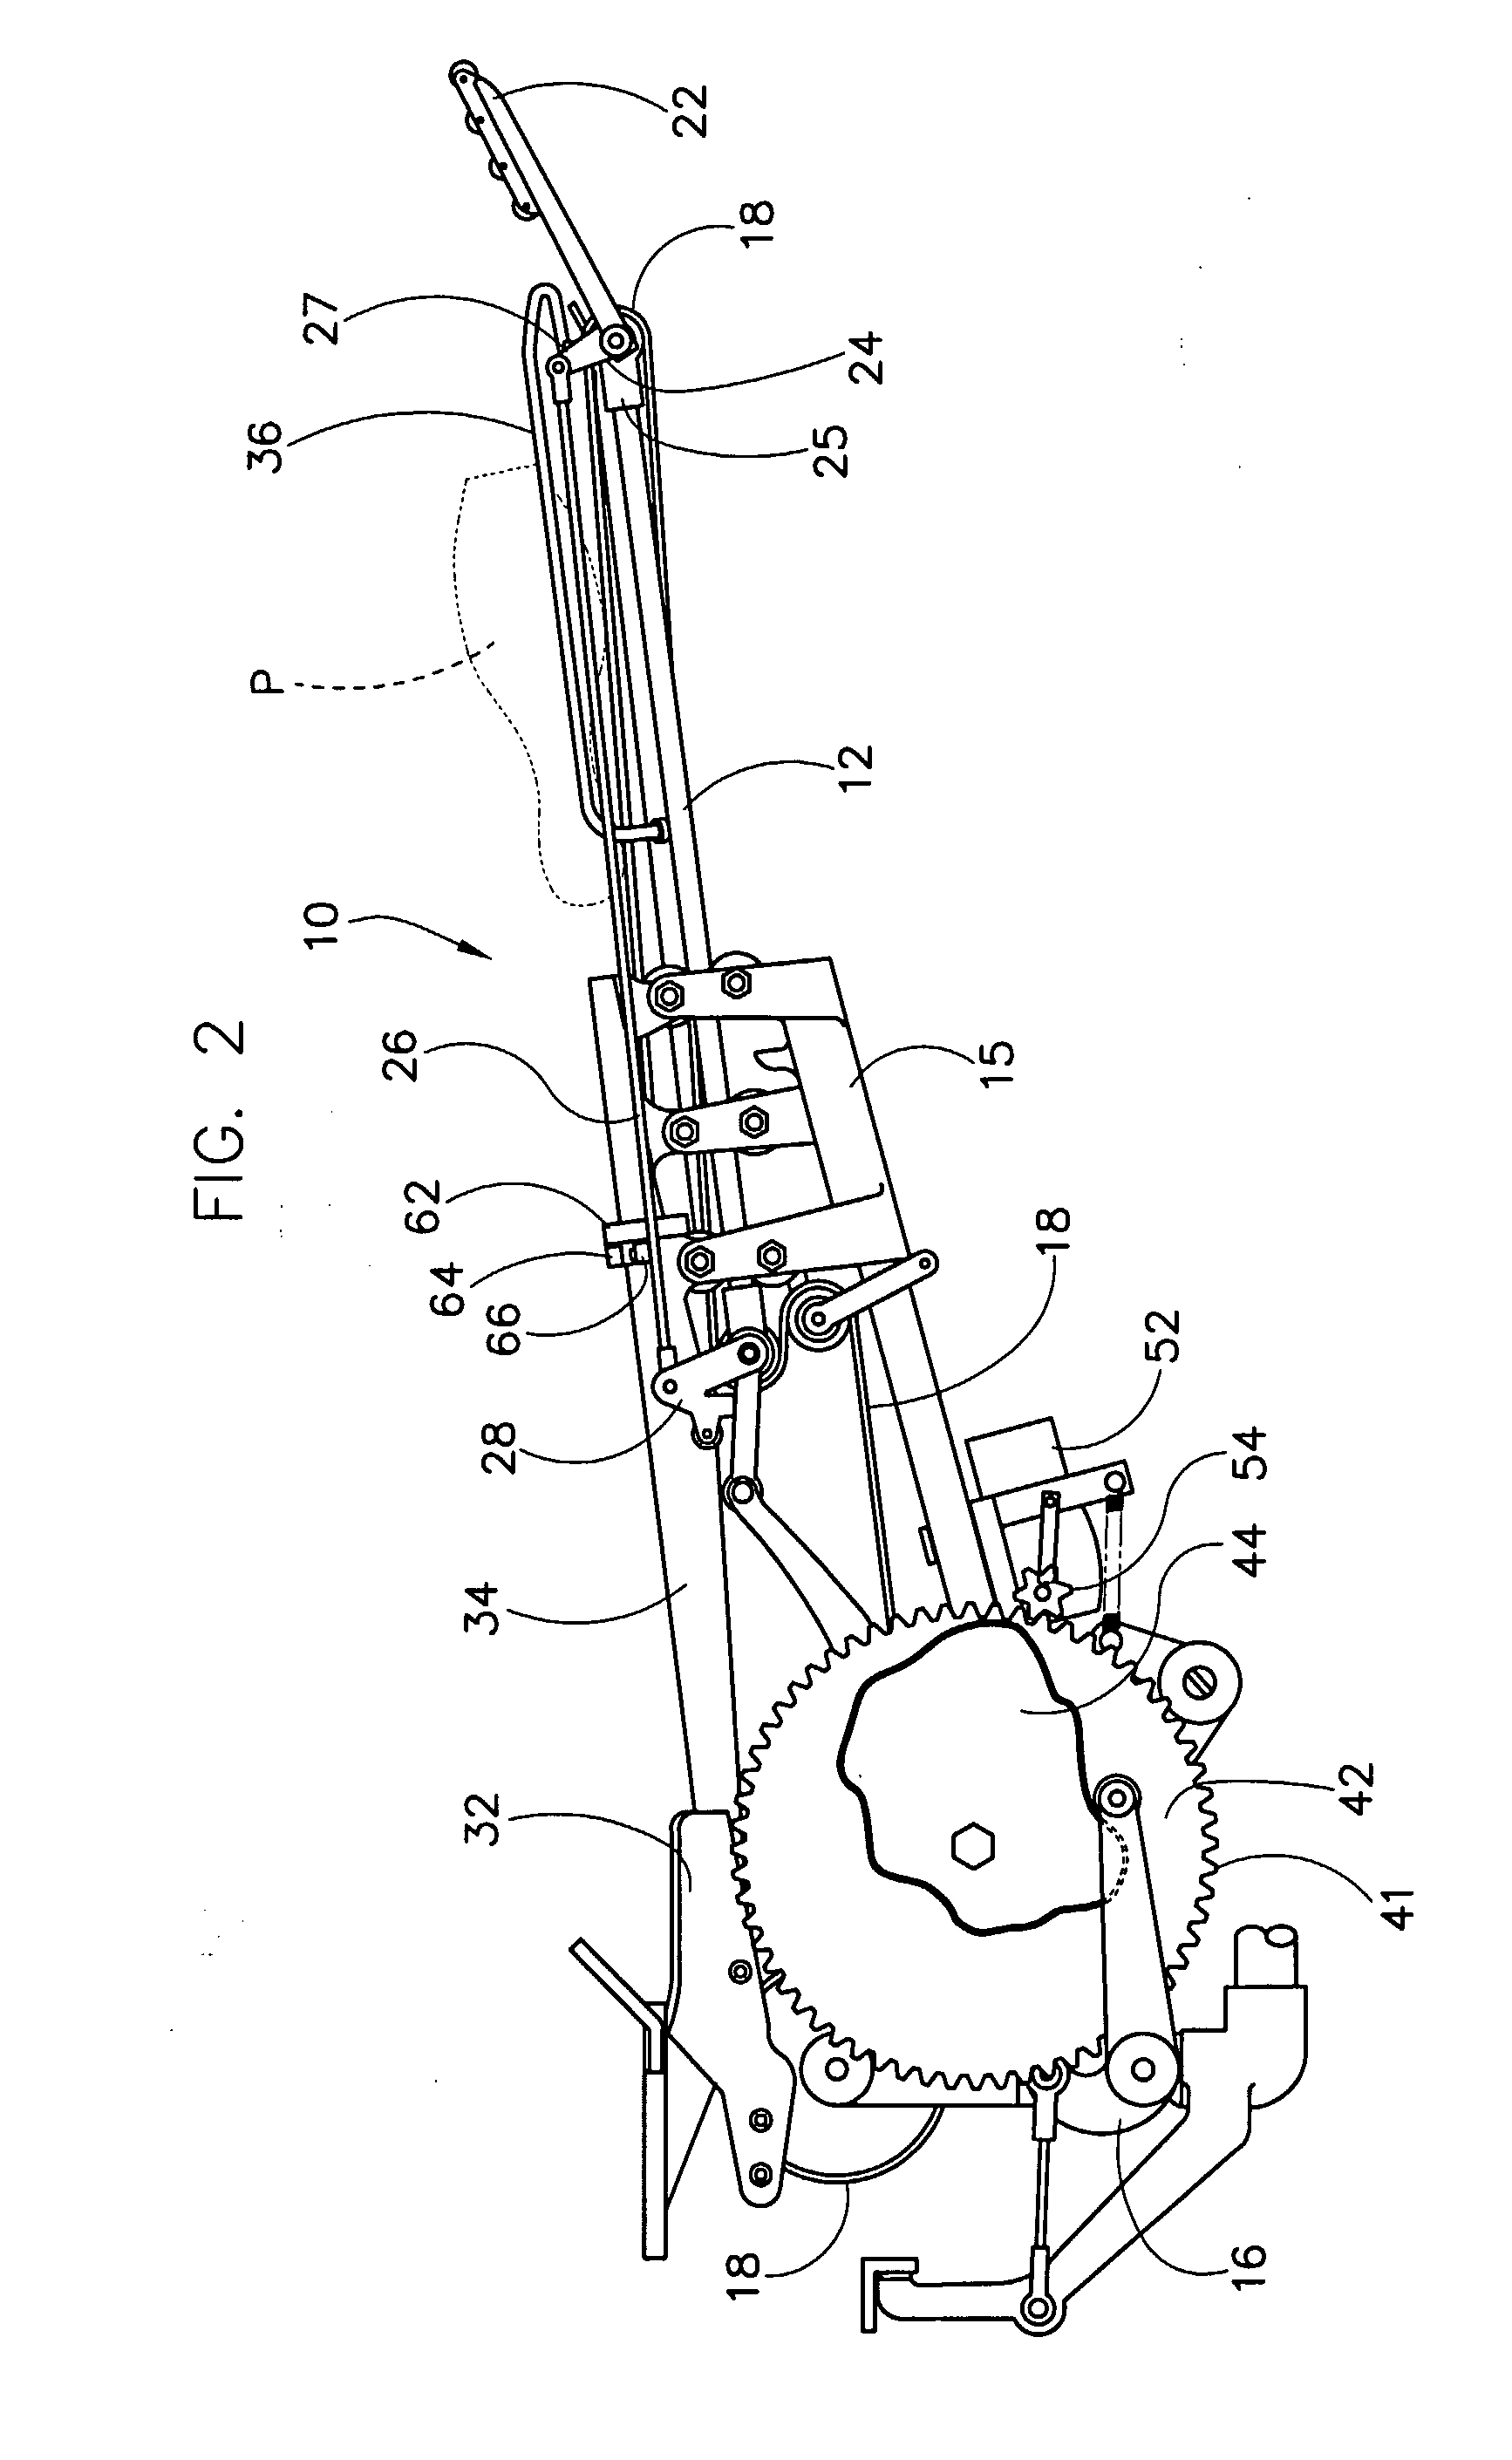 Distributor Indexing Device